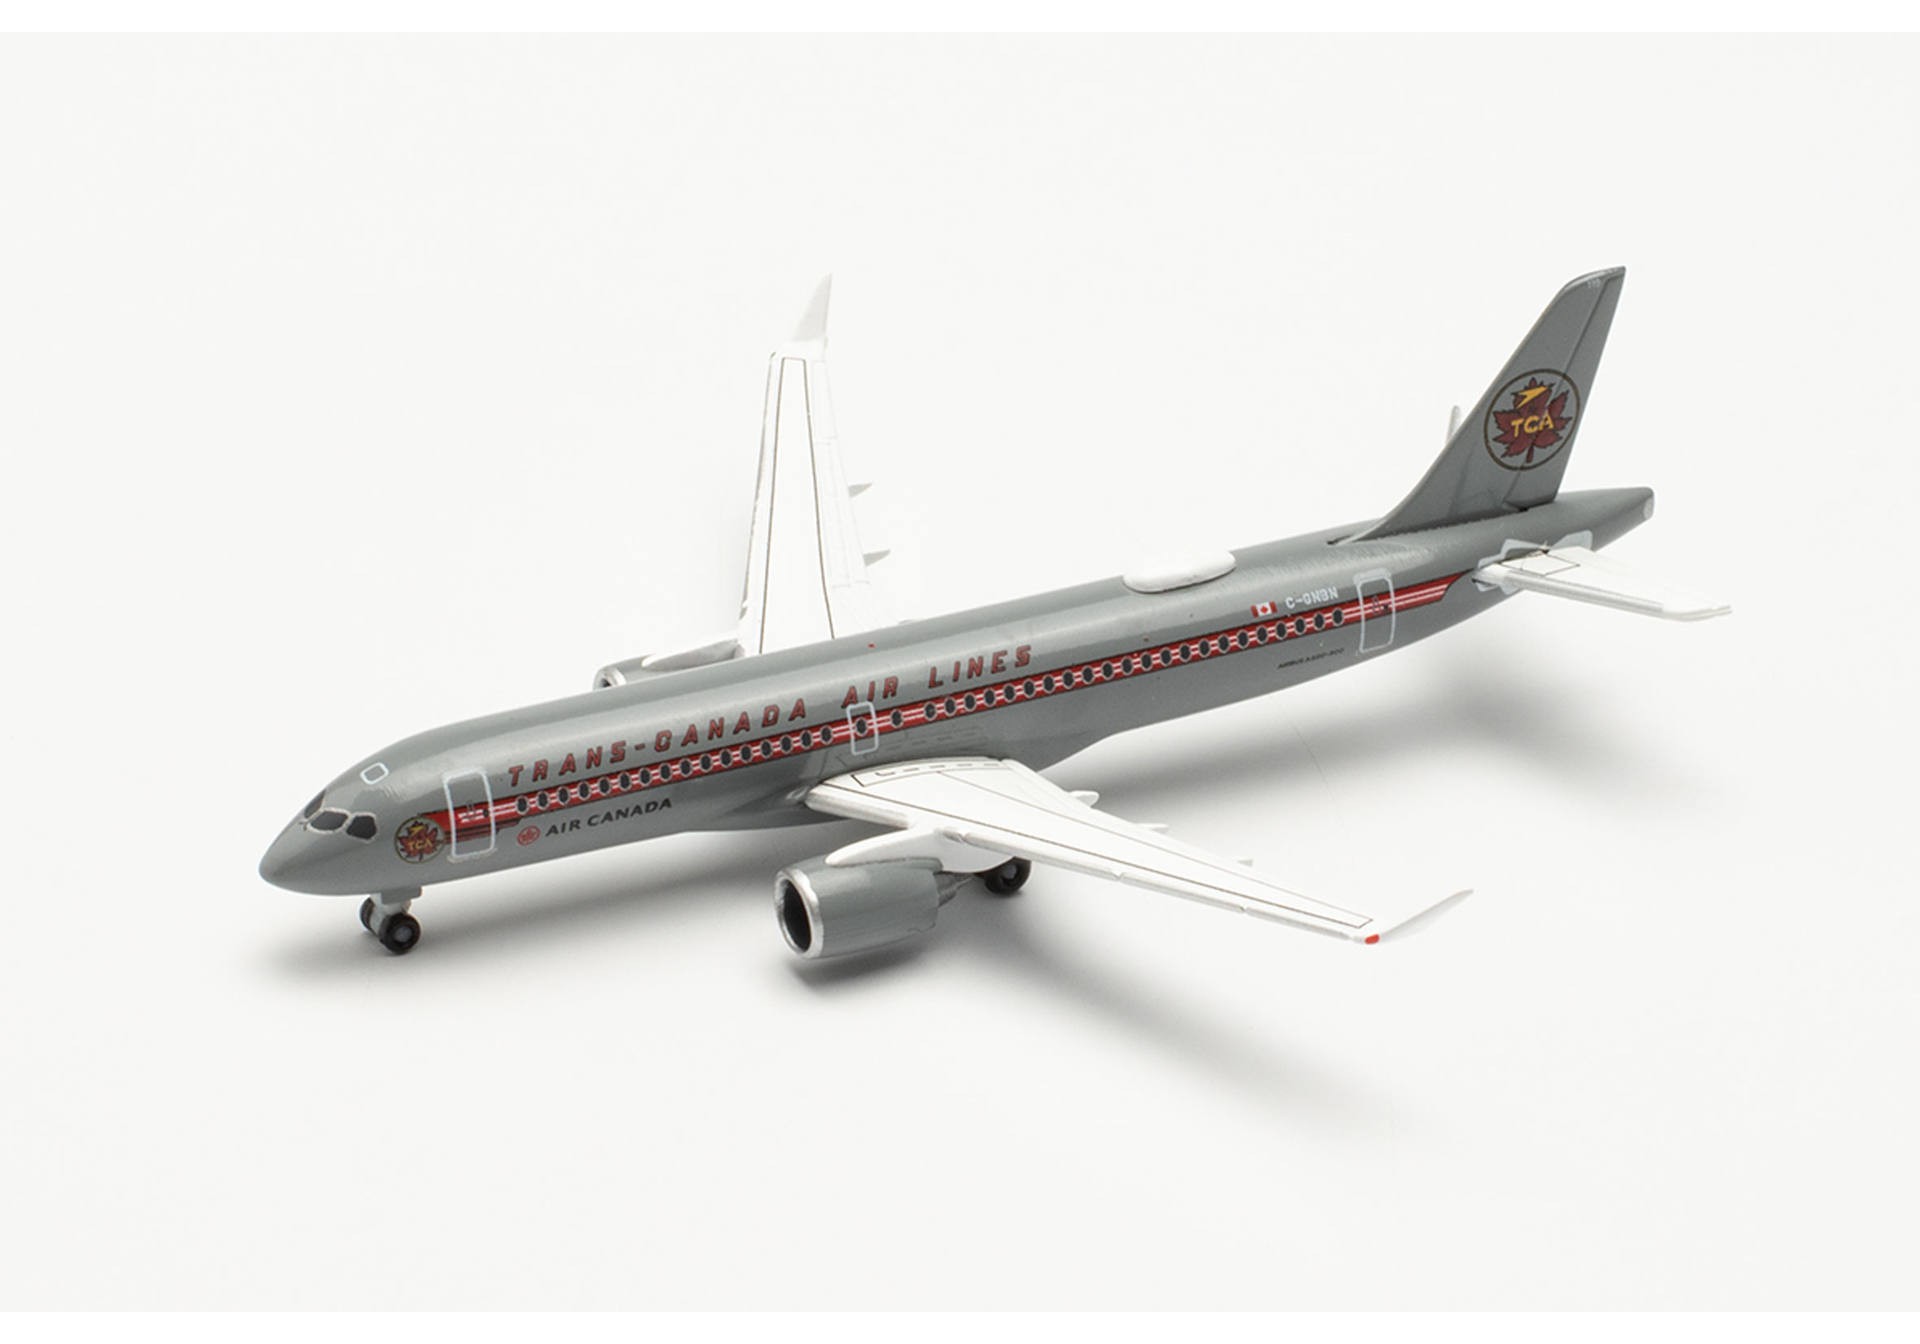 Herpa Wings 536158 Air Canada Airbus A220-300 Trans Canada Air Lines "Retro Livery" model aircraft 1:500